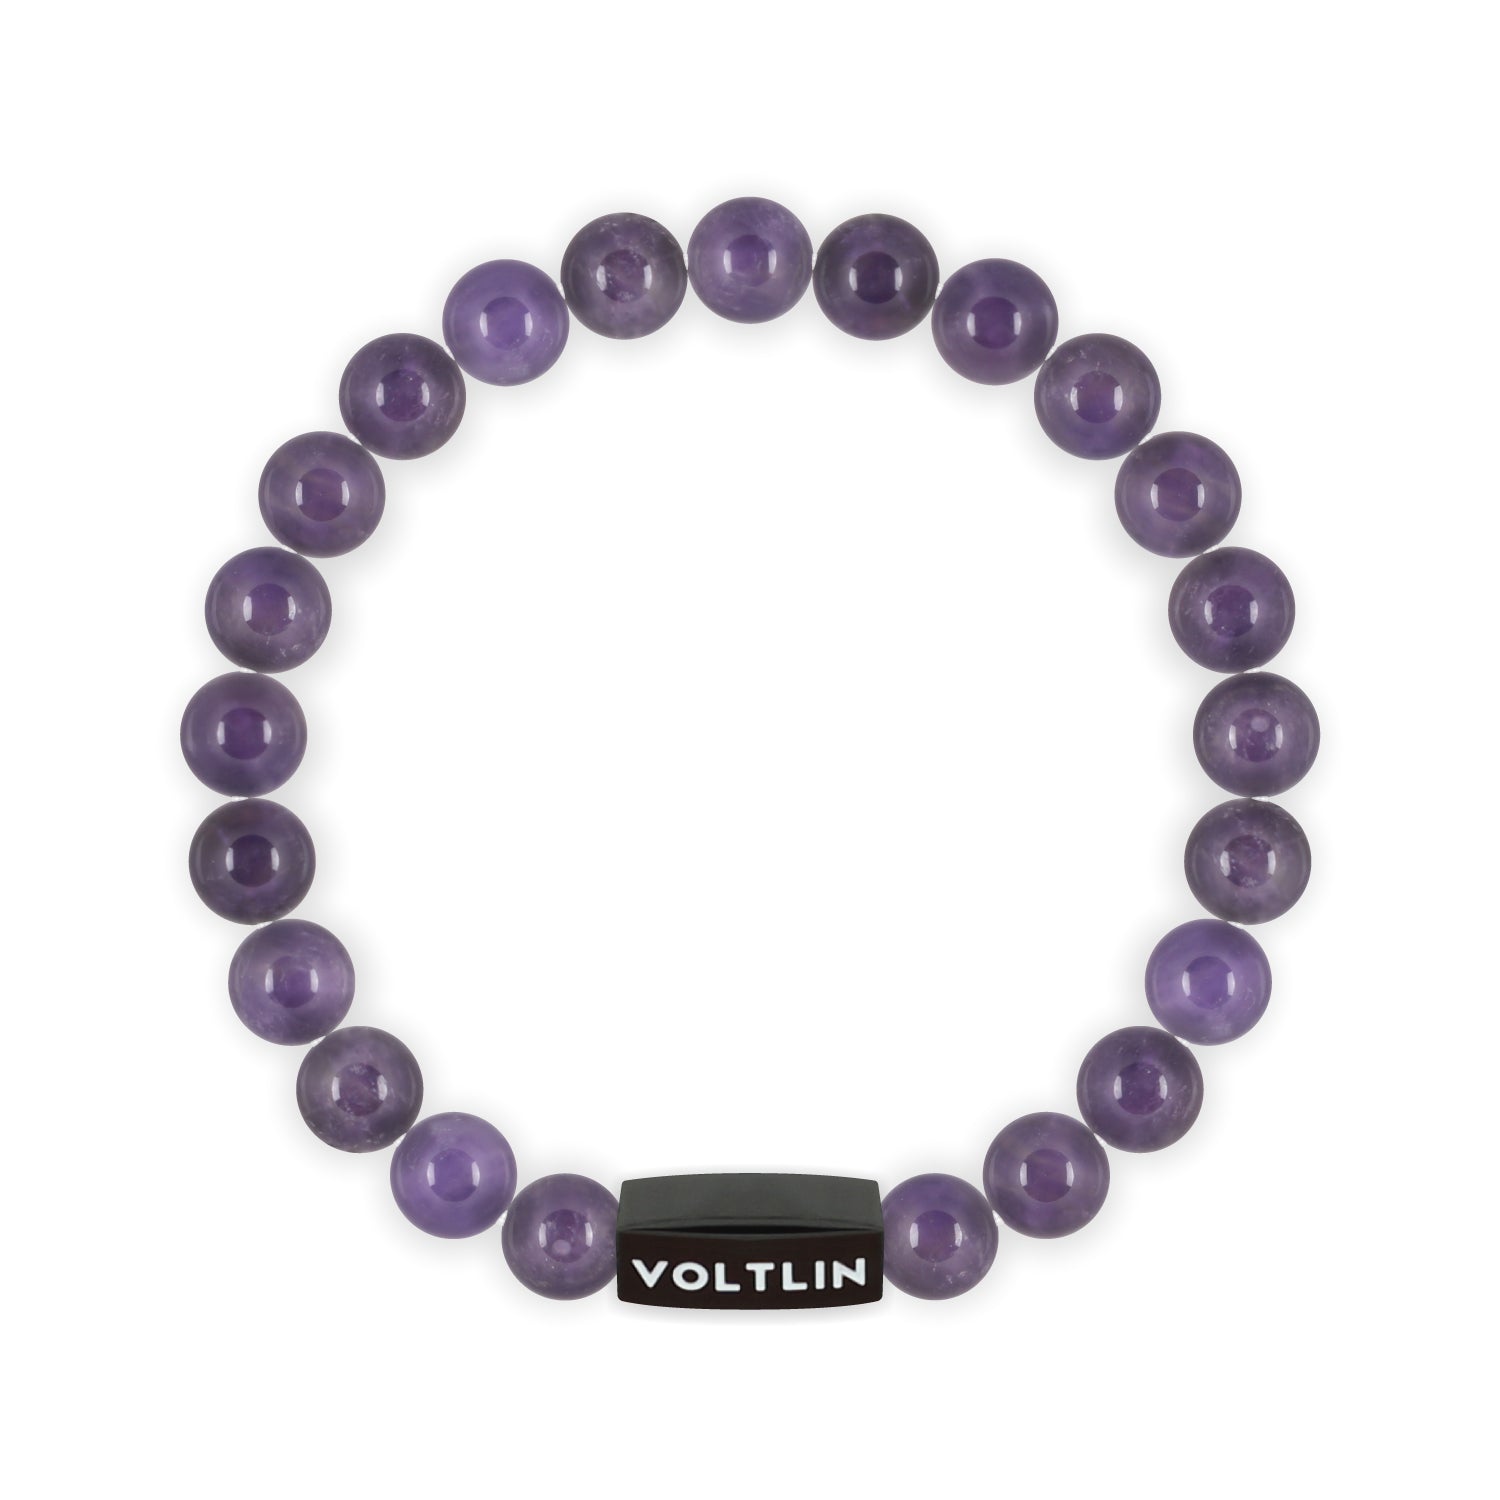 Front view of an 8mm Amethyst crystal beaded stretch bracelet with black stainless steel logo bead made by Voltlin